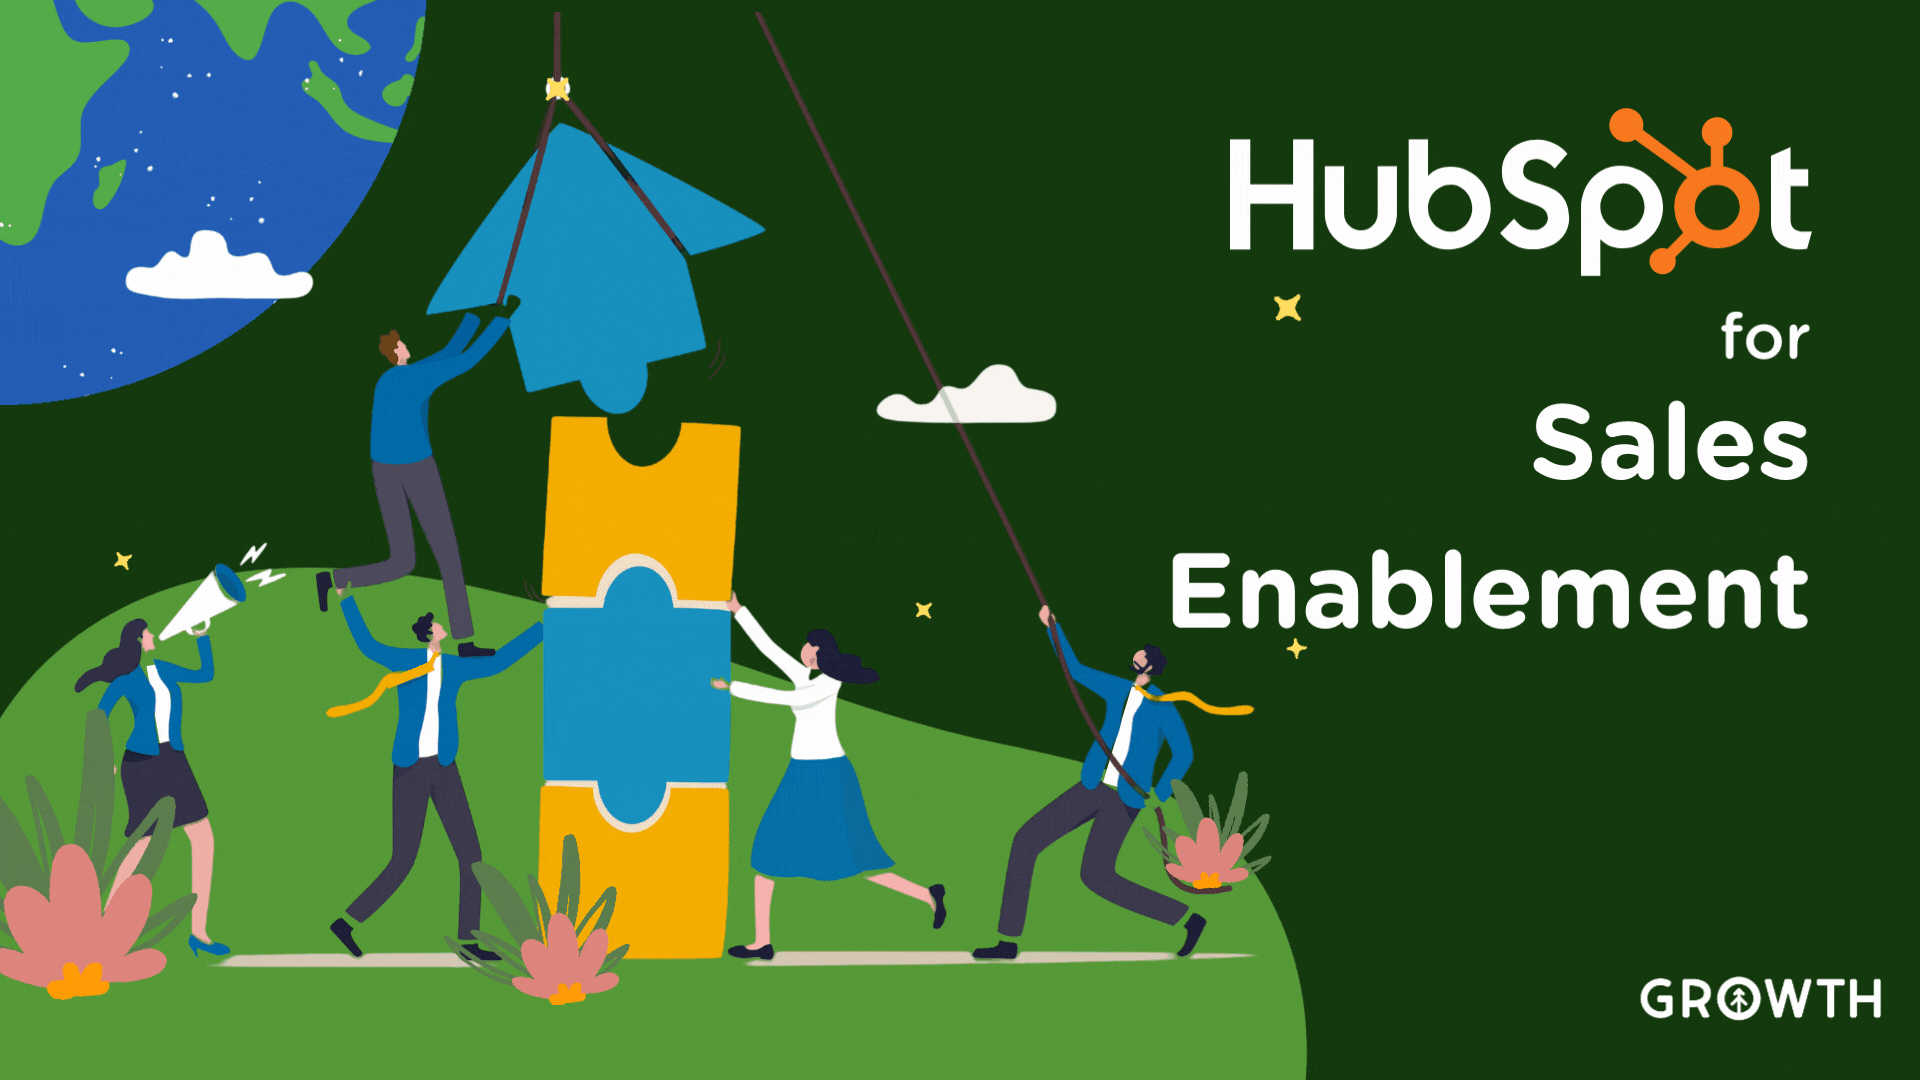 HubSpot for Sales Enablement